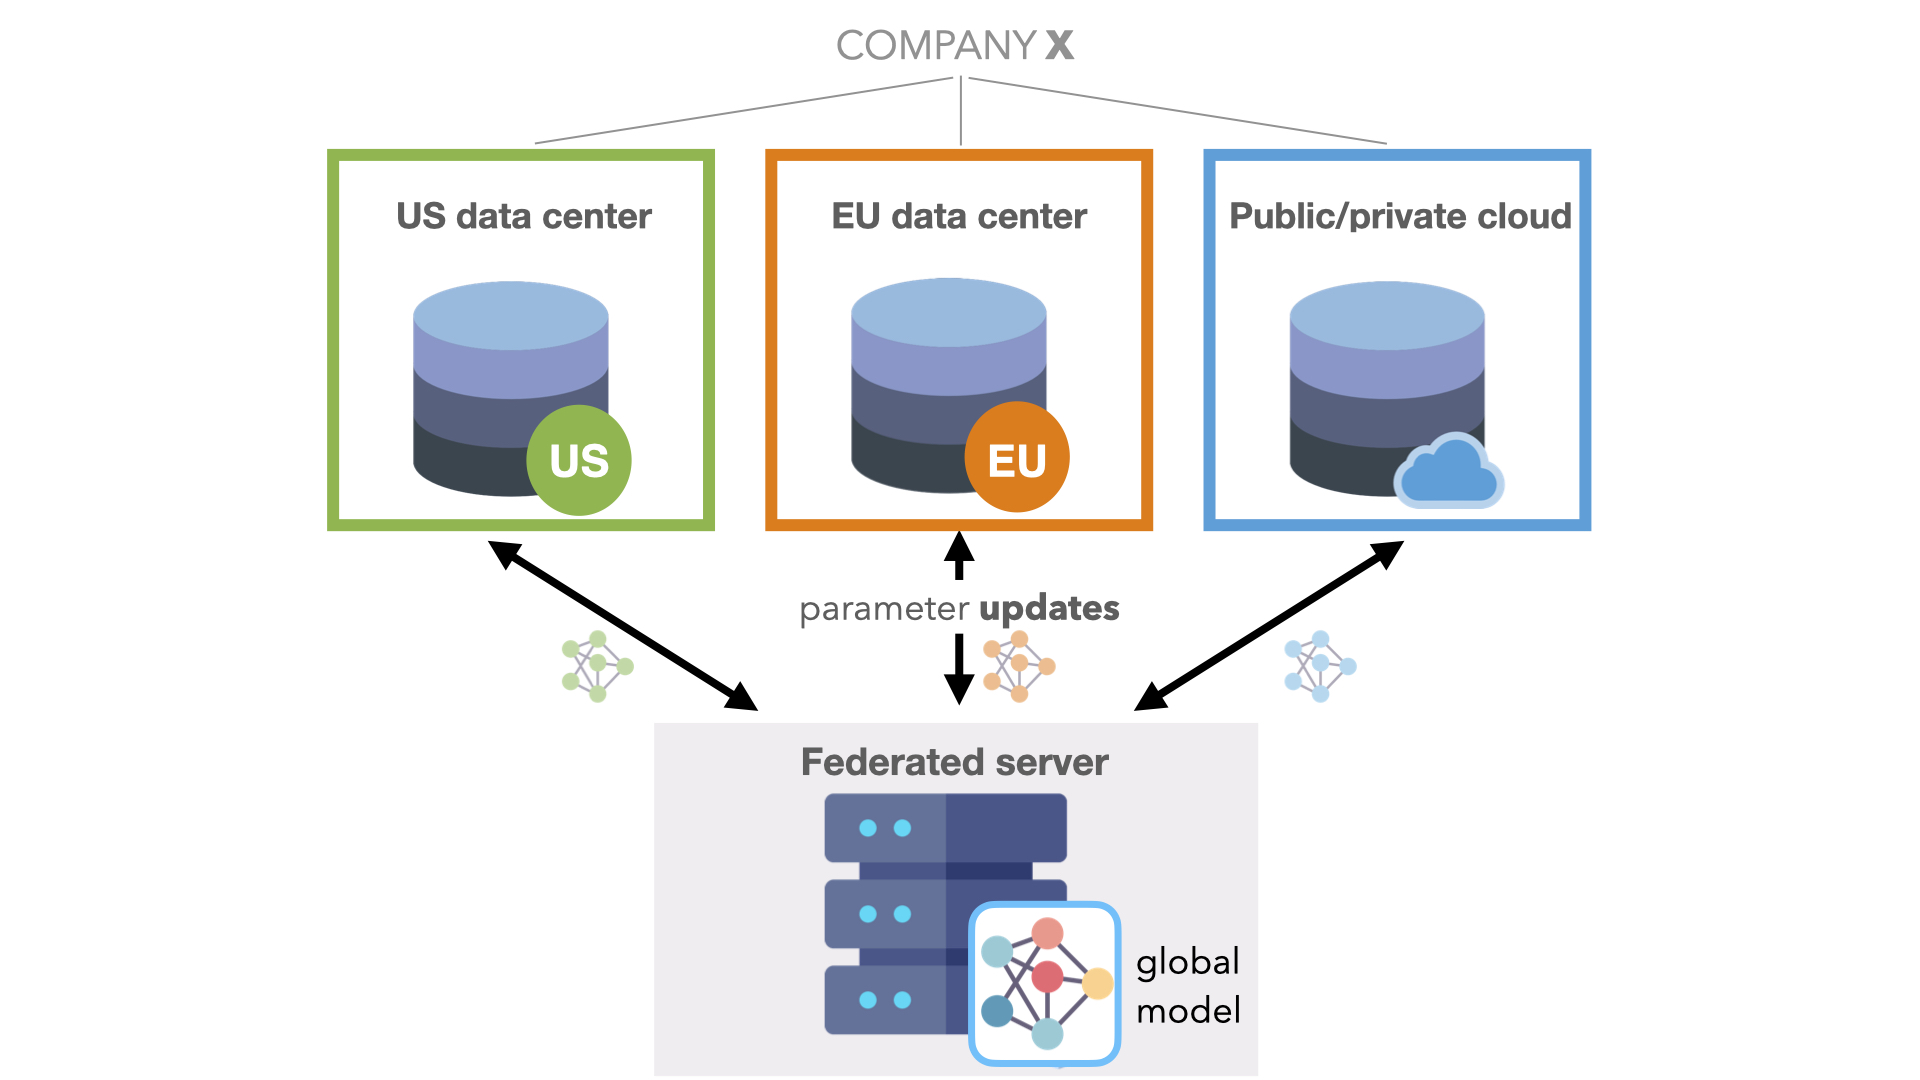 Illustration of example workflow in an intra-company use case showing a federated server (bottom) storing the global model and then receiving parameters or model weights from client nodes (US data center, EU data center, public/private cloud).